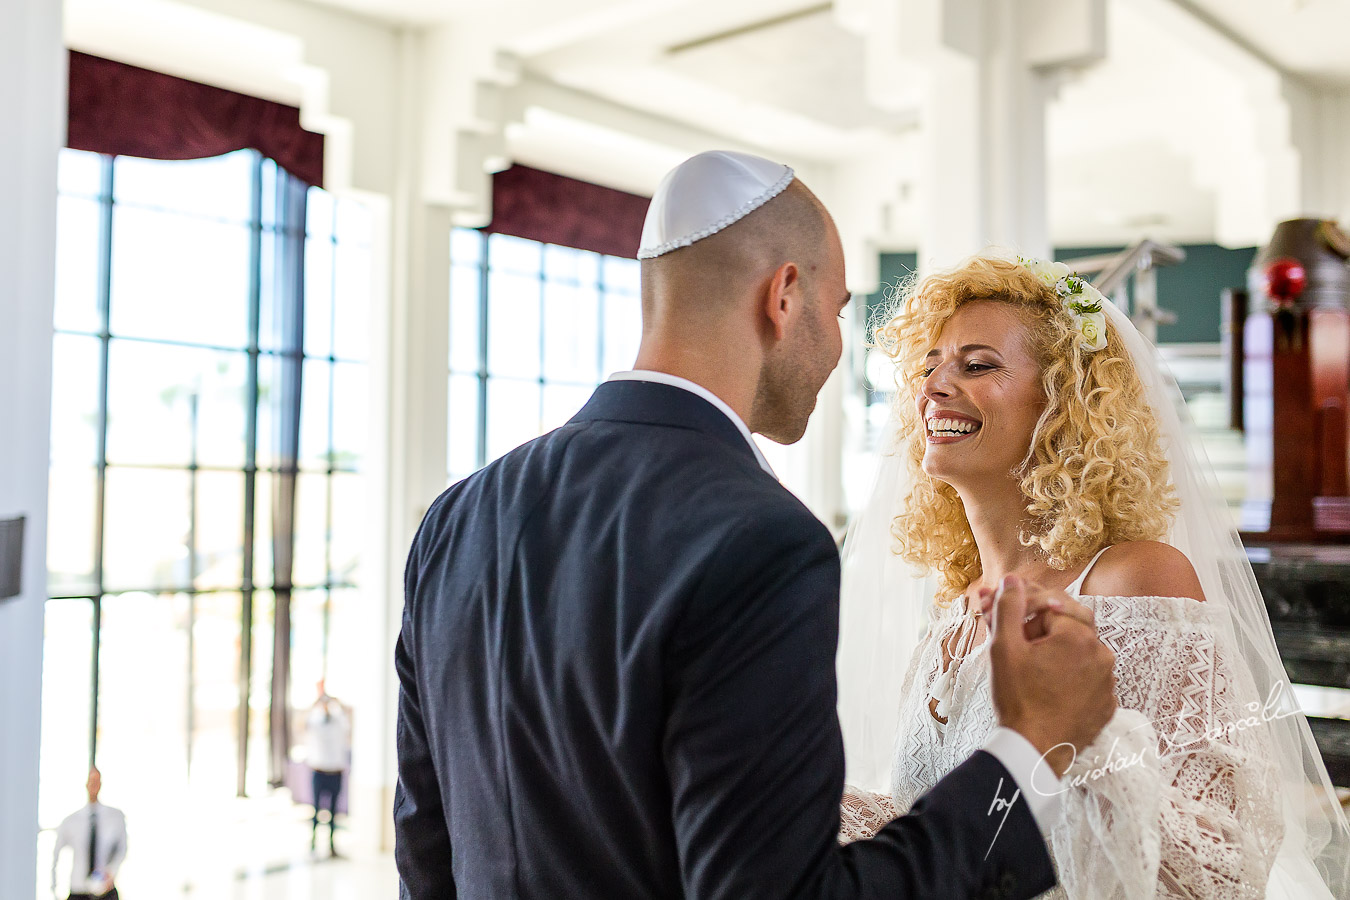 The groom meets his bride before their Jewish Wedding Ceremony in Cyprus.